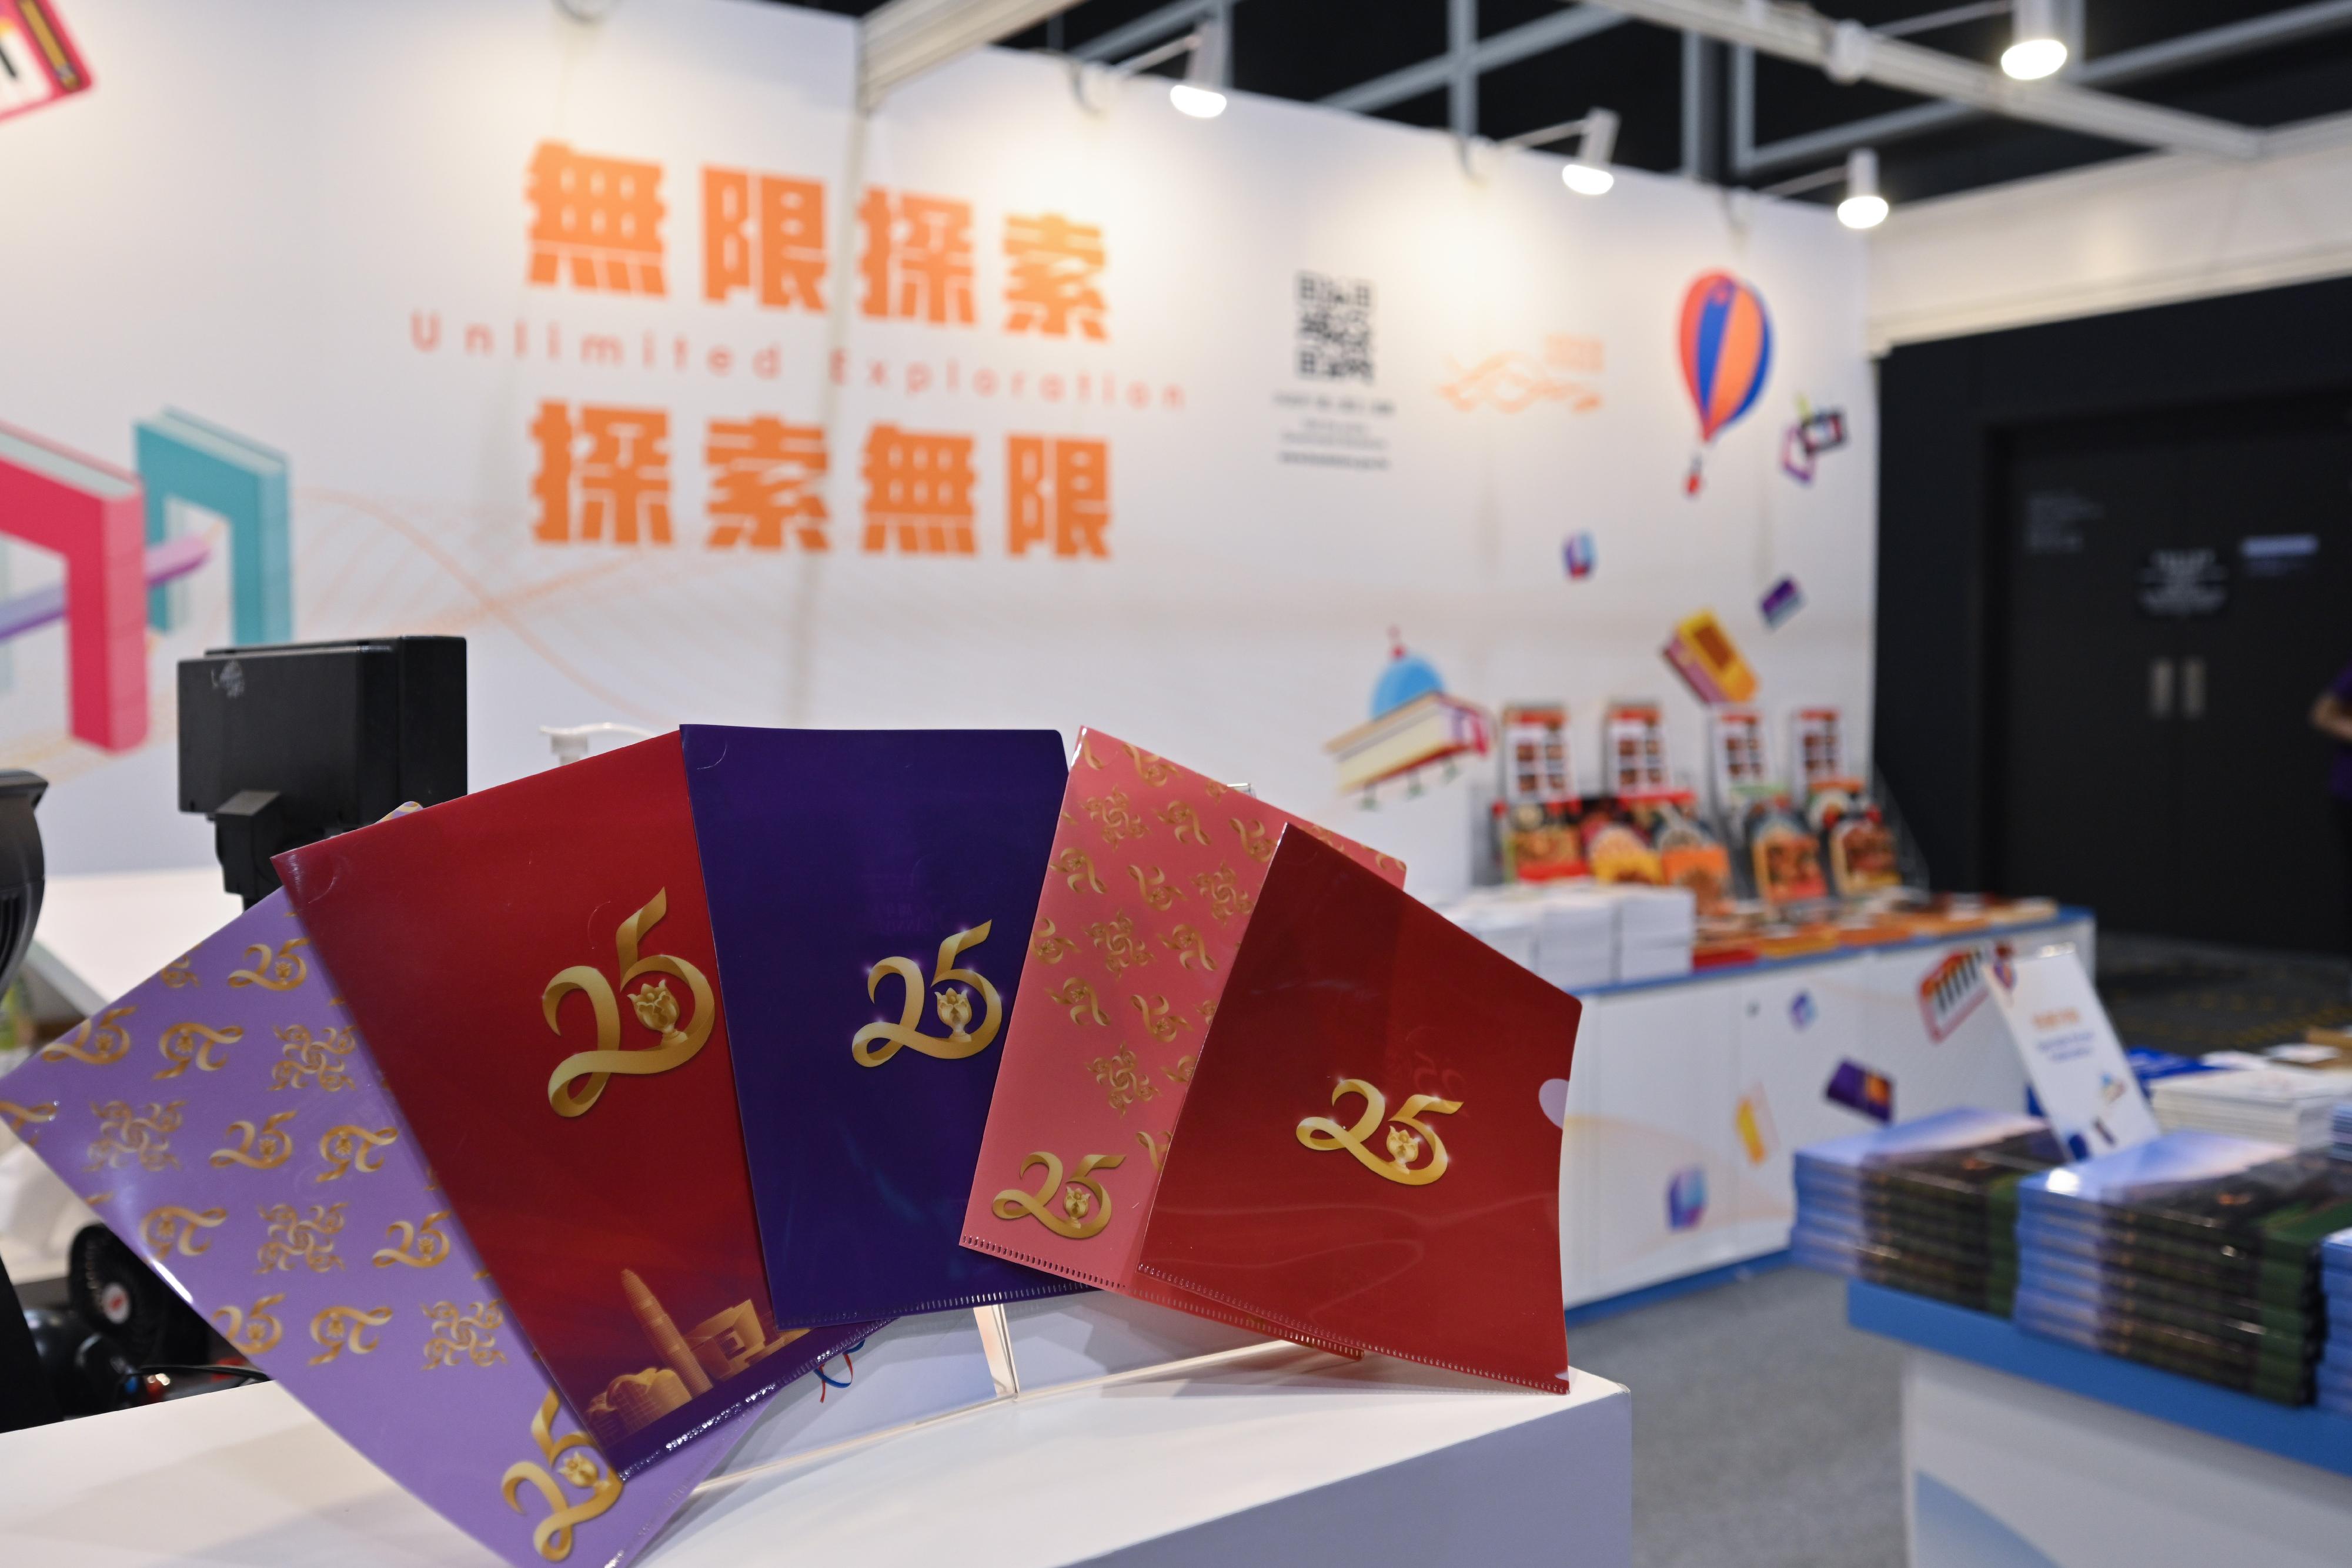 The Information Services Department (ISD) is taking part in this year's Hong Kong Book Fair from today (July 20) to July 26 under the theme "Unlimited Exploration". Photo shows the A5 folder souvenir which will be given to customers buying publications at the ISD booth.